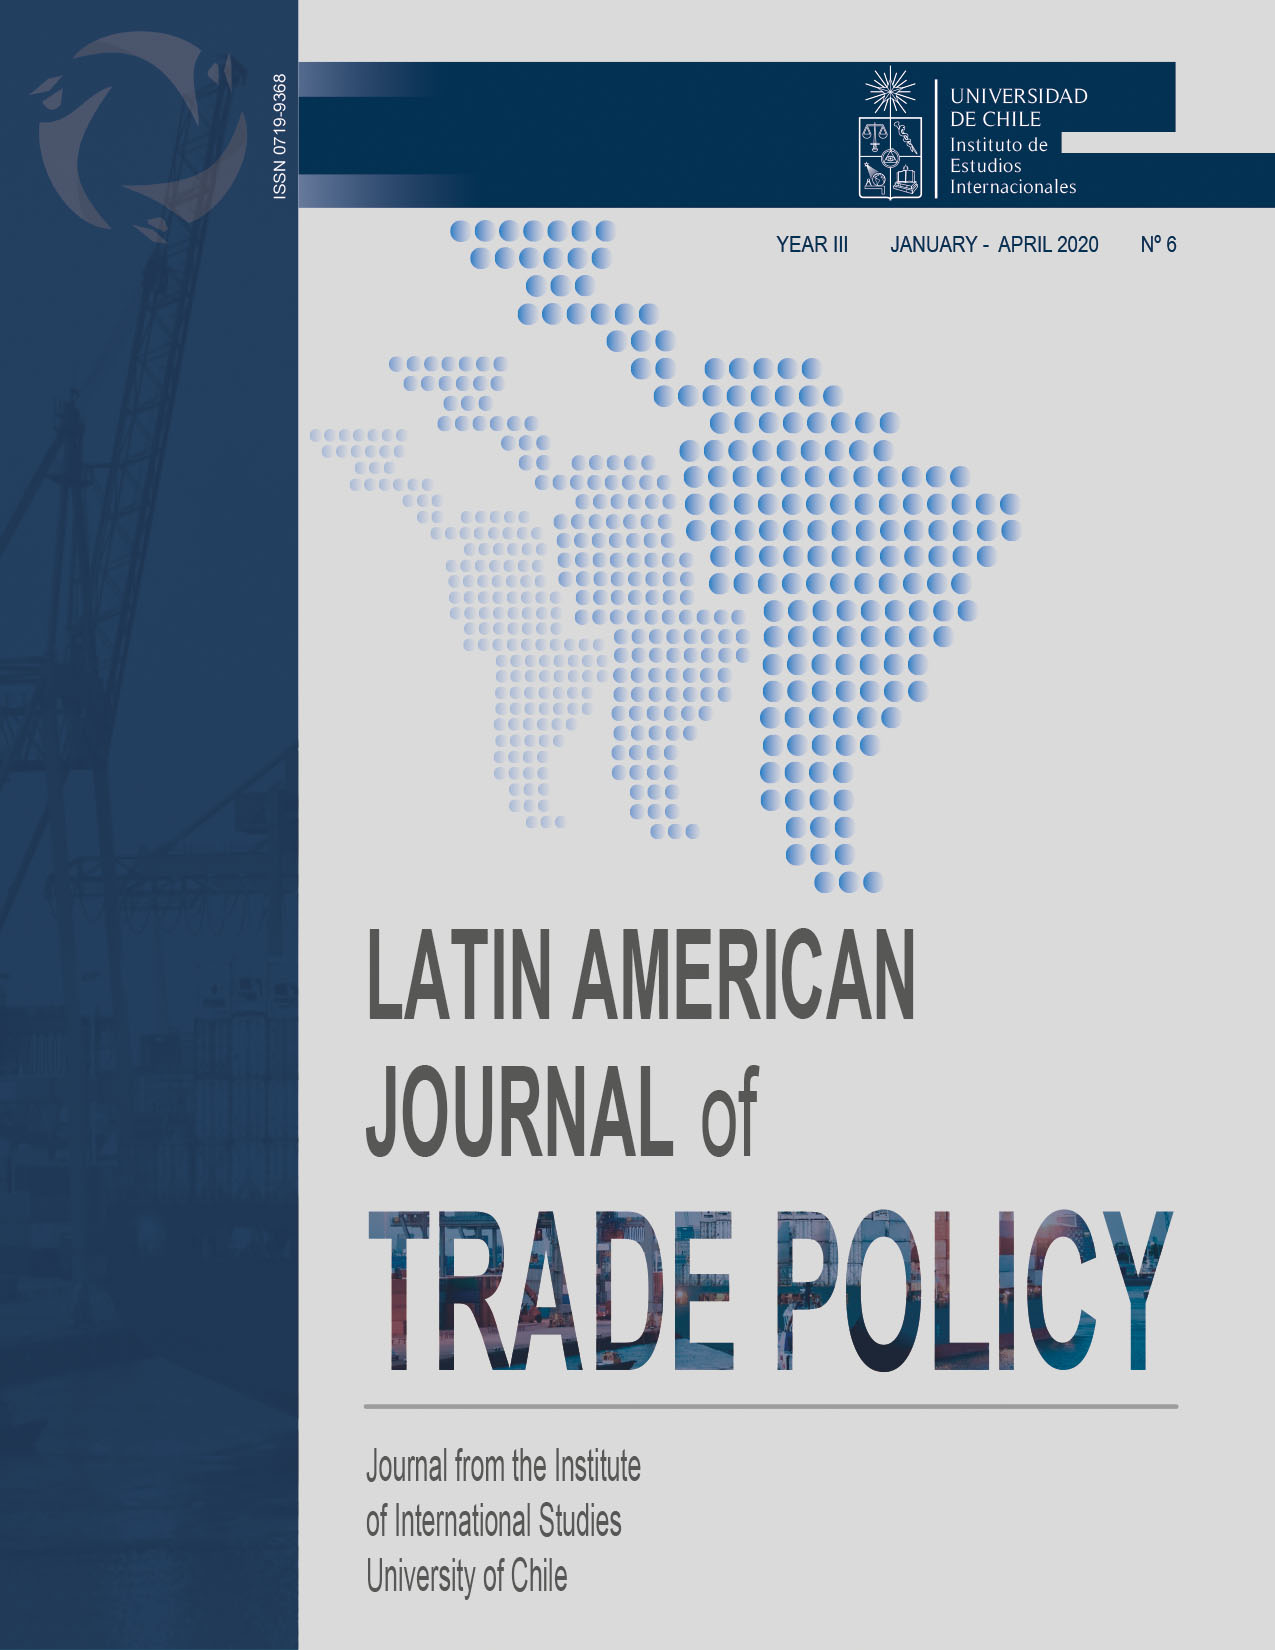 							View Vol. 3 No. 6 (2020): Latin American Journal of Trade Policy
						